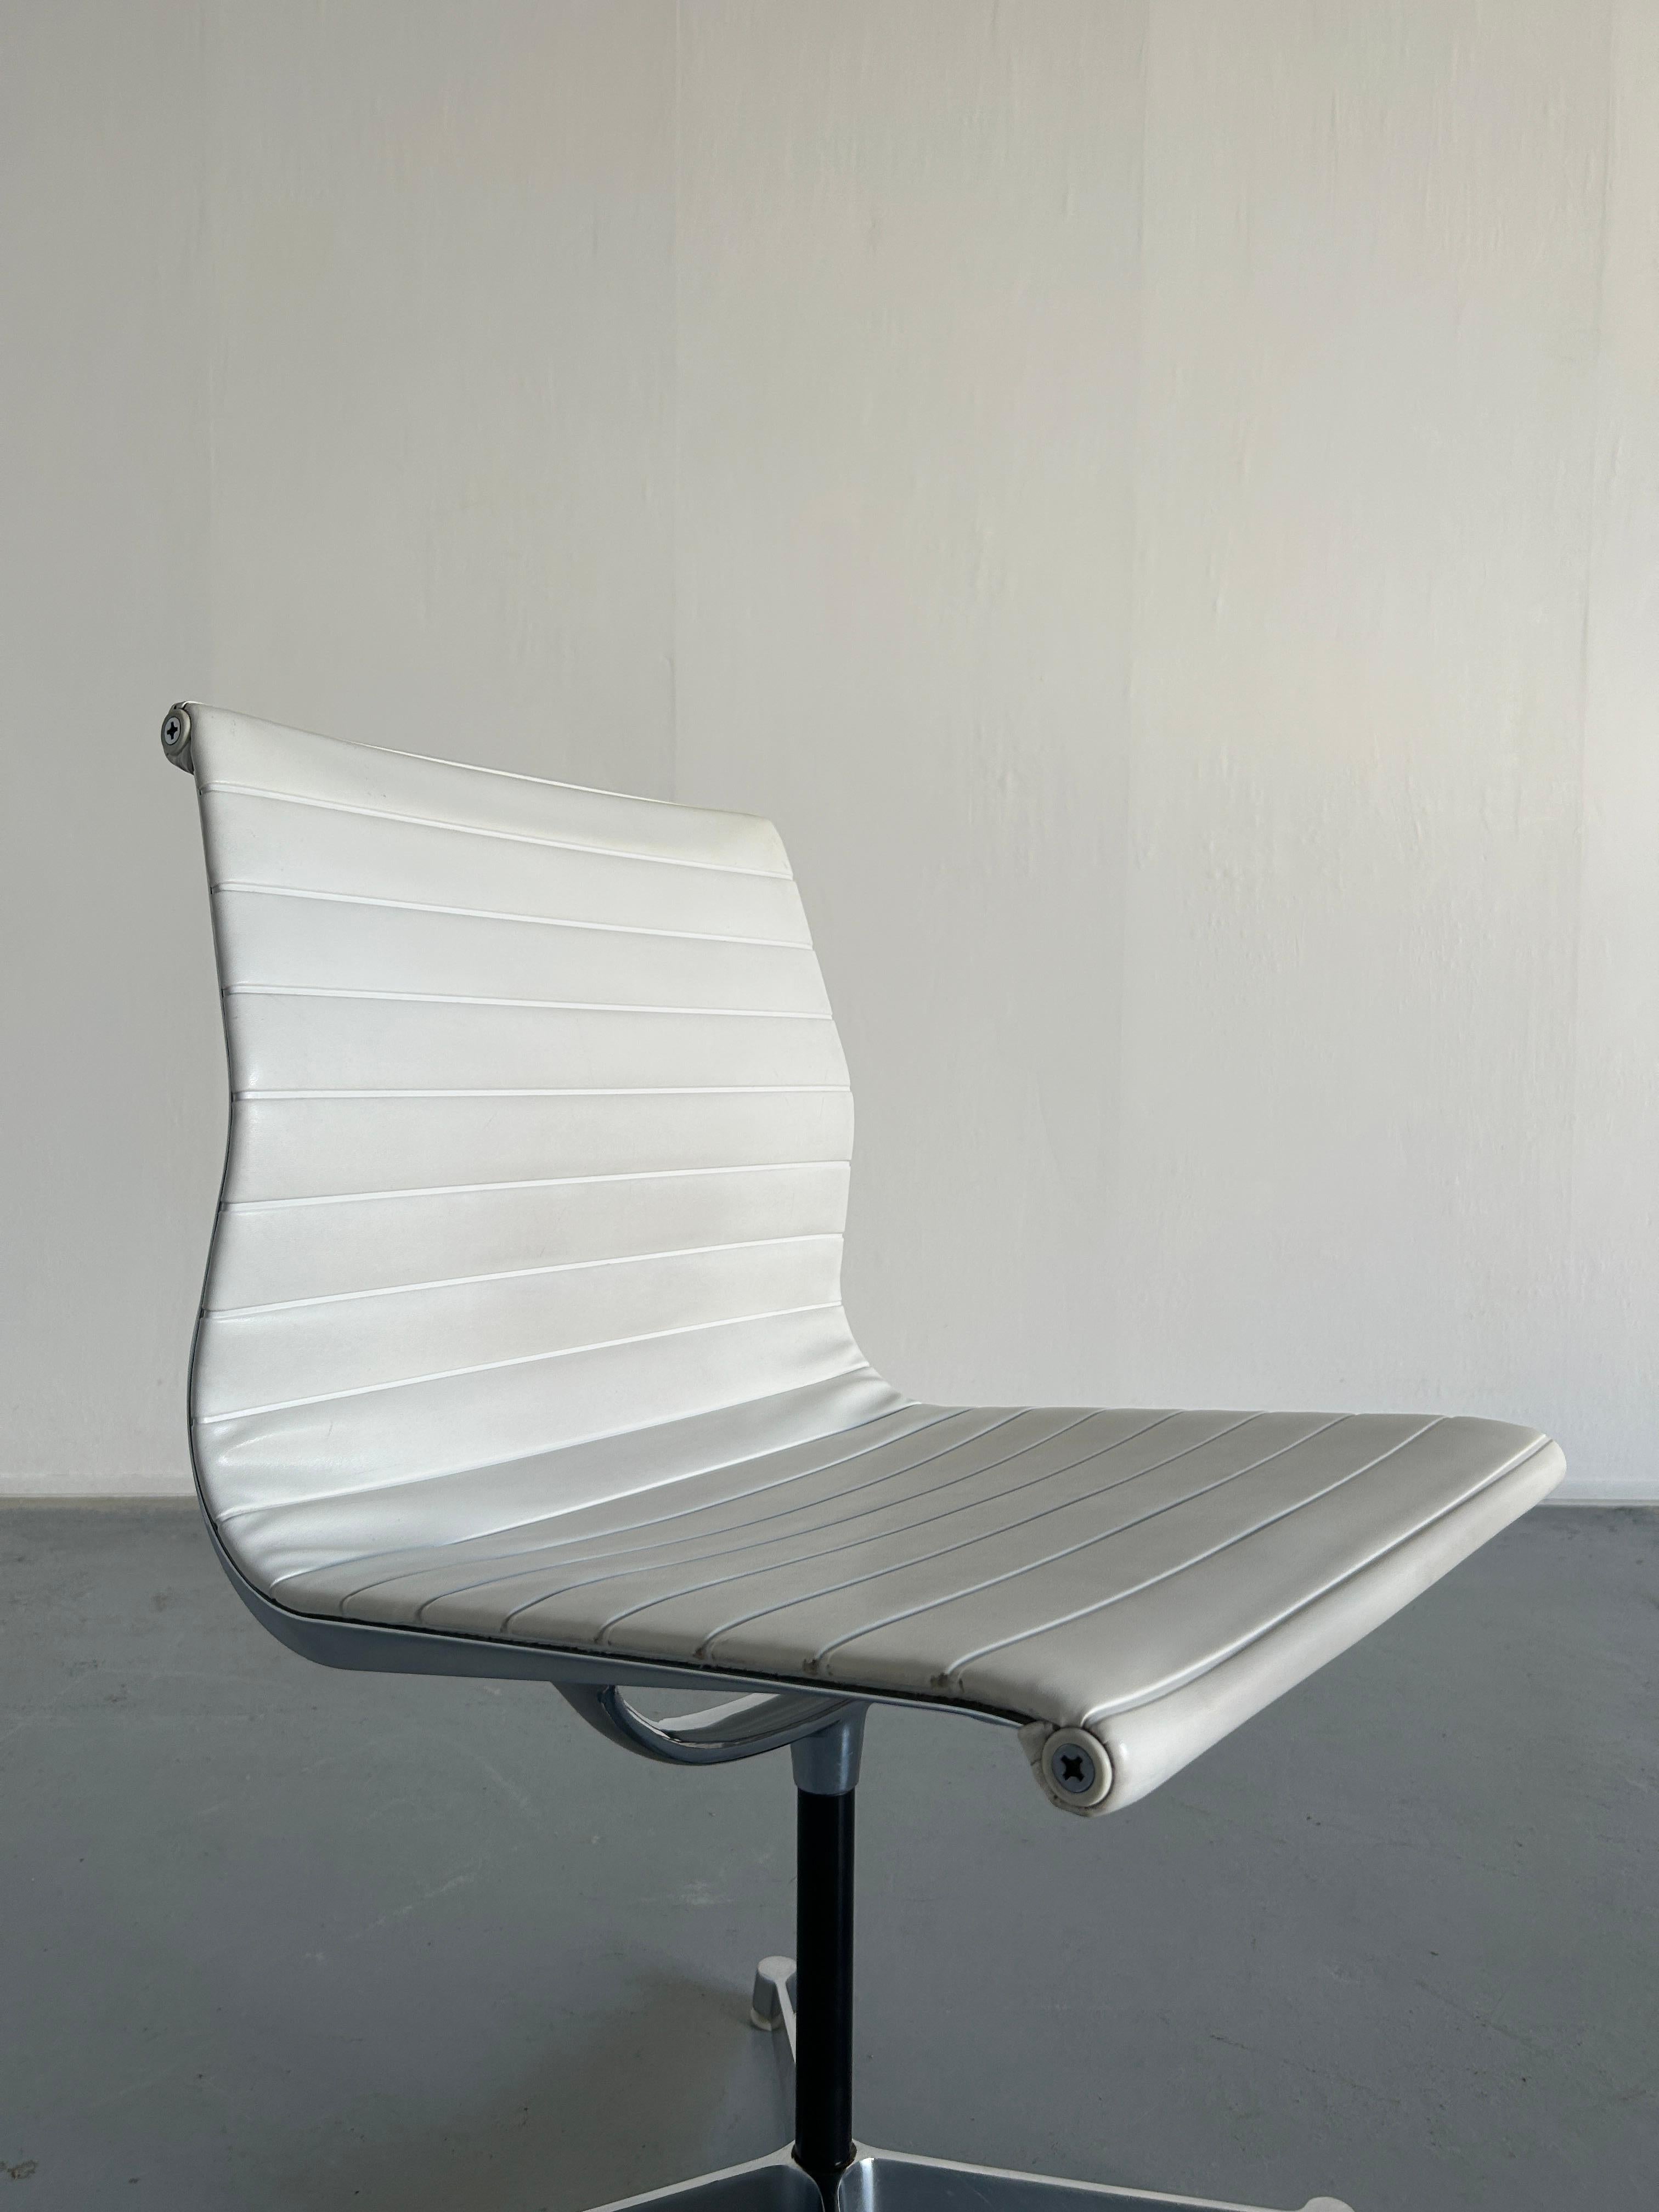 1 of 5 Original Vintage 'EA 107' Aluminium Desk Chairs by Charles & Ray Eames For Sale 2